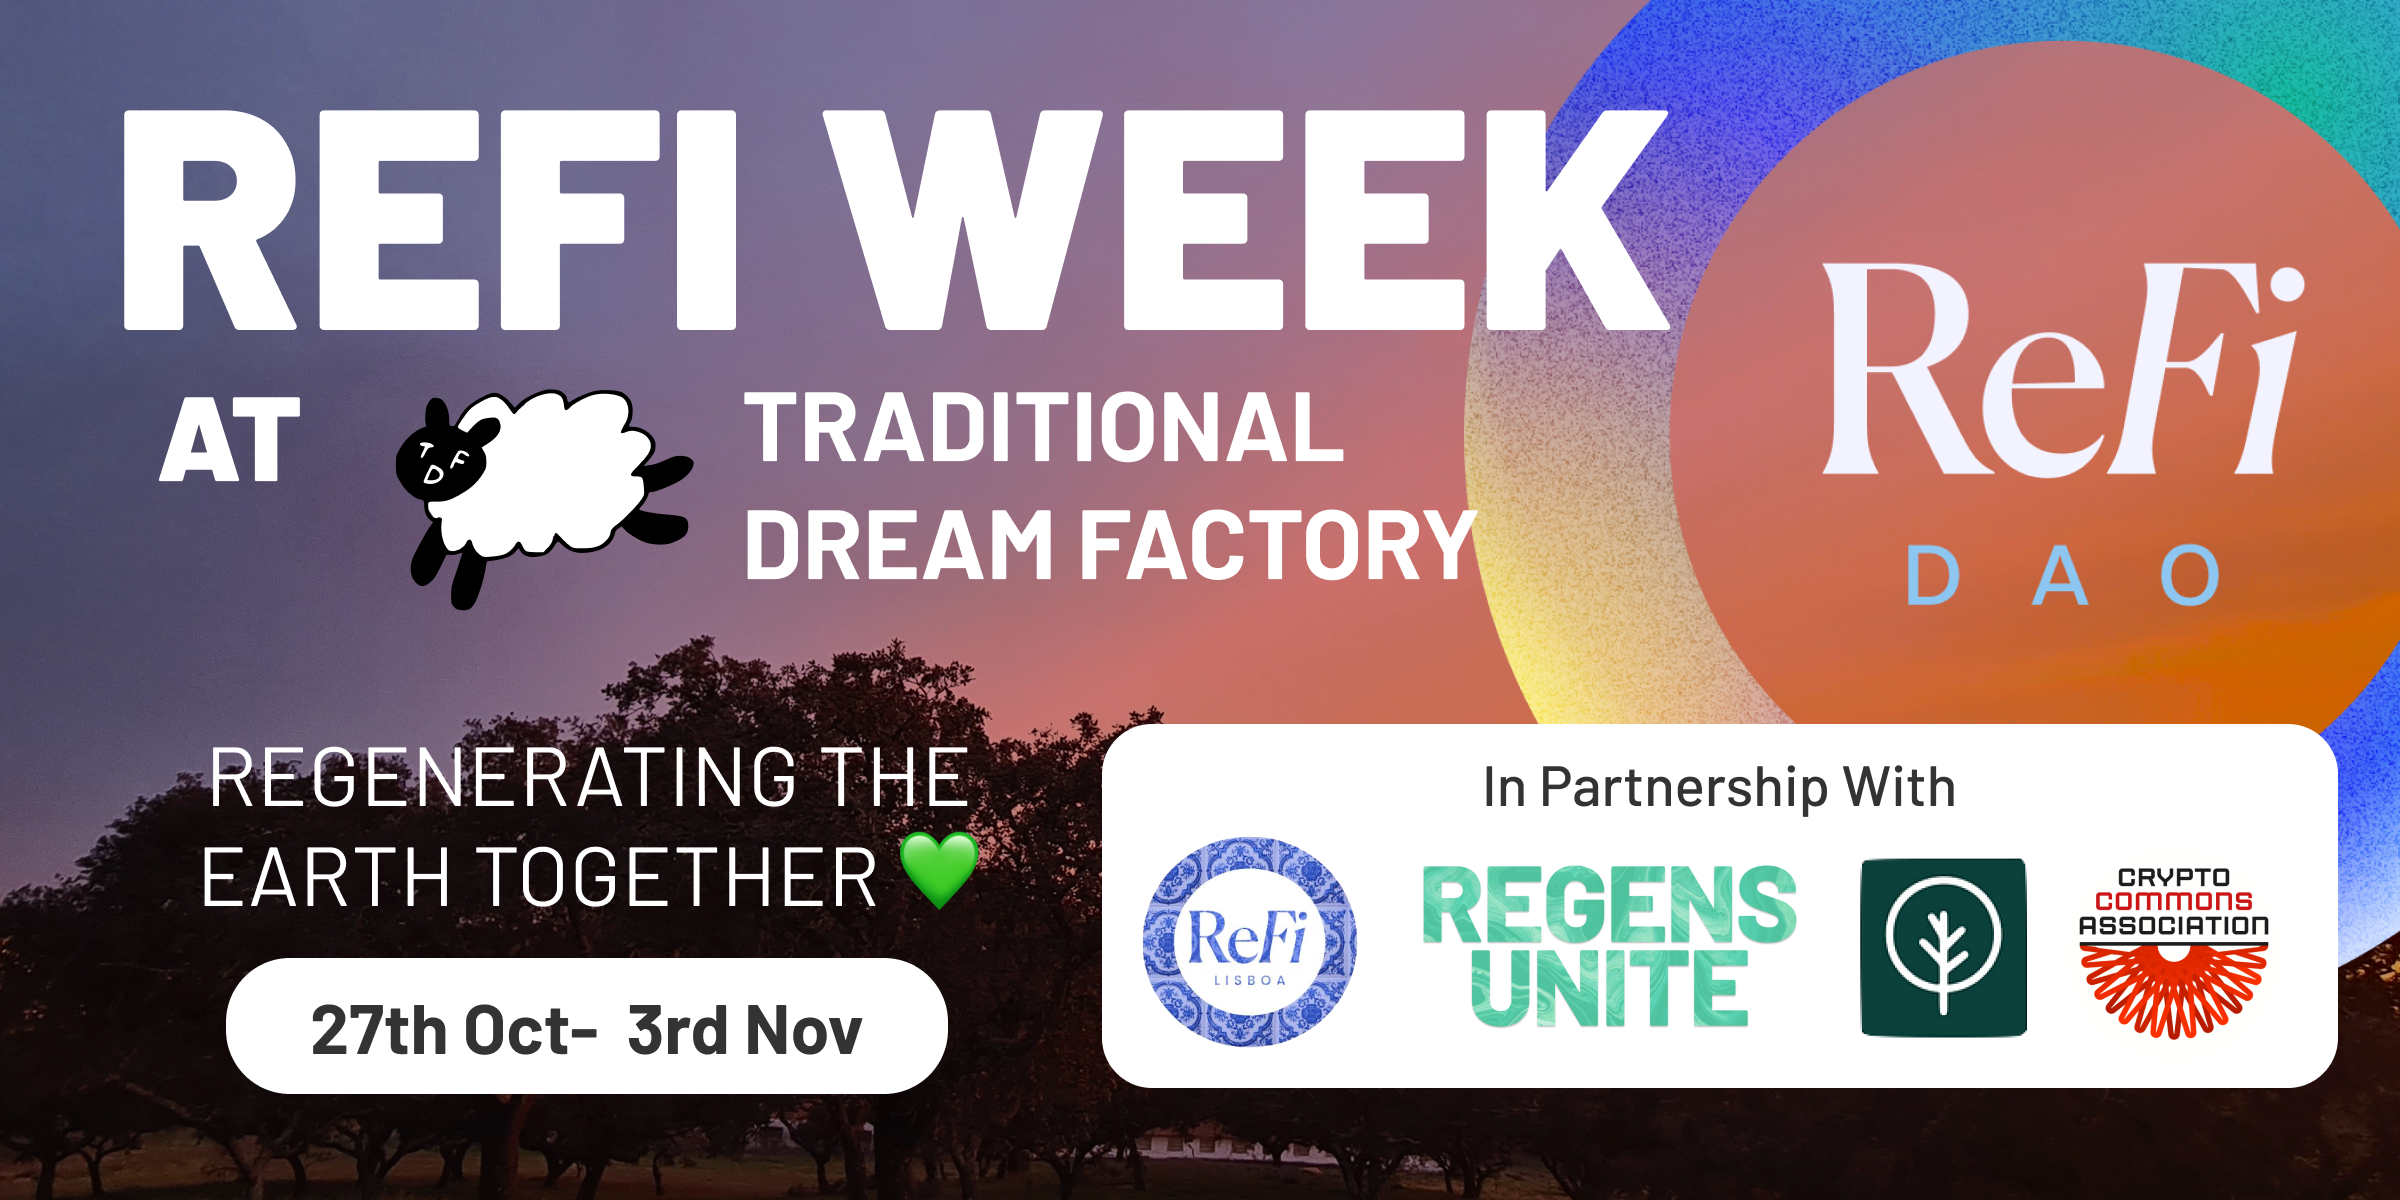 ReFi Week at Traditional Dream Factory (TDF) 🐑 + Annual Meeting Update! 💫